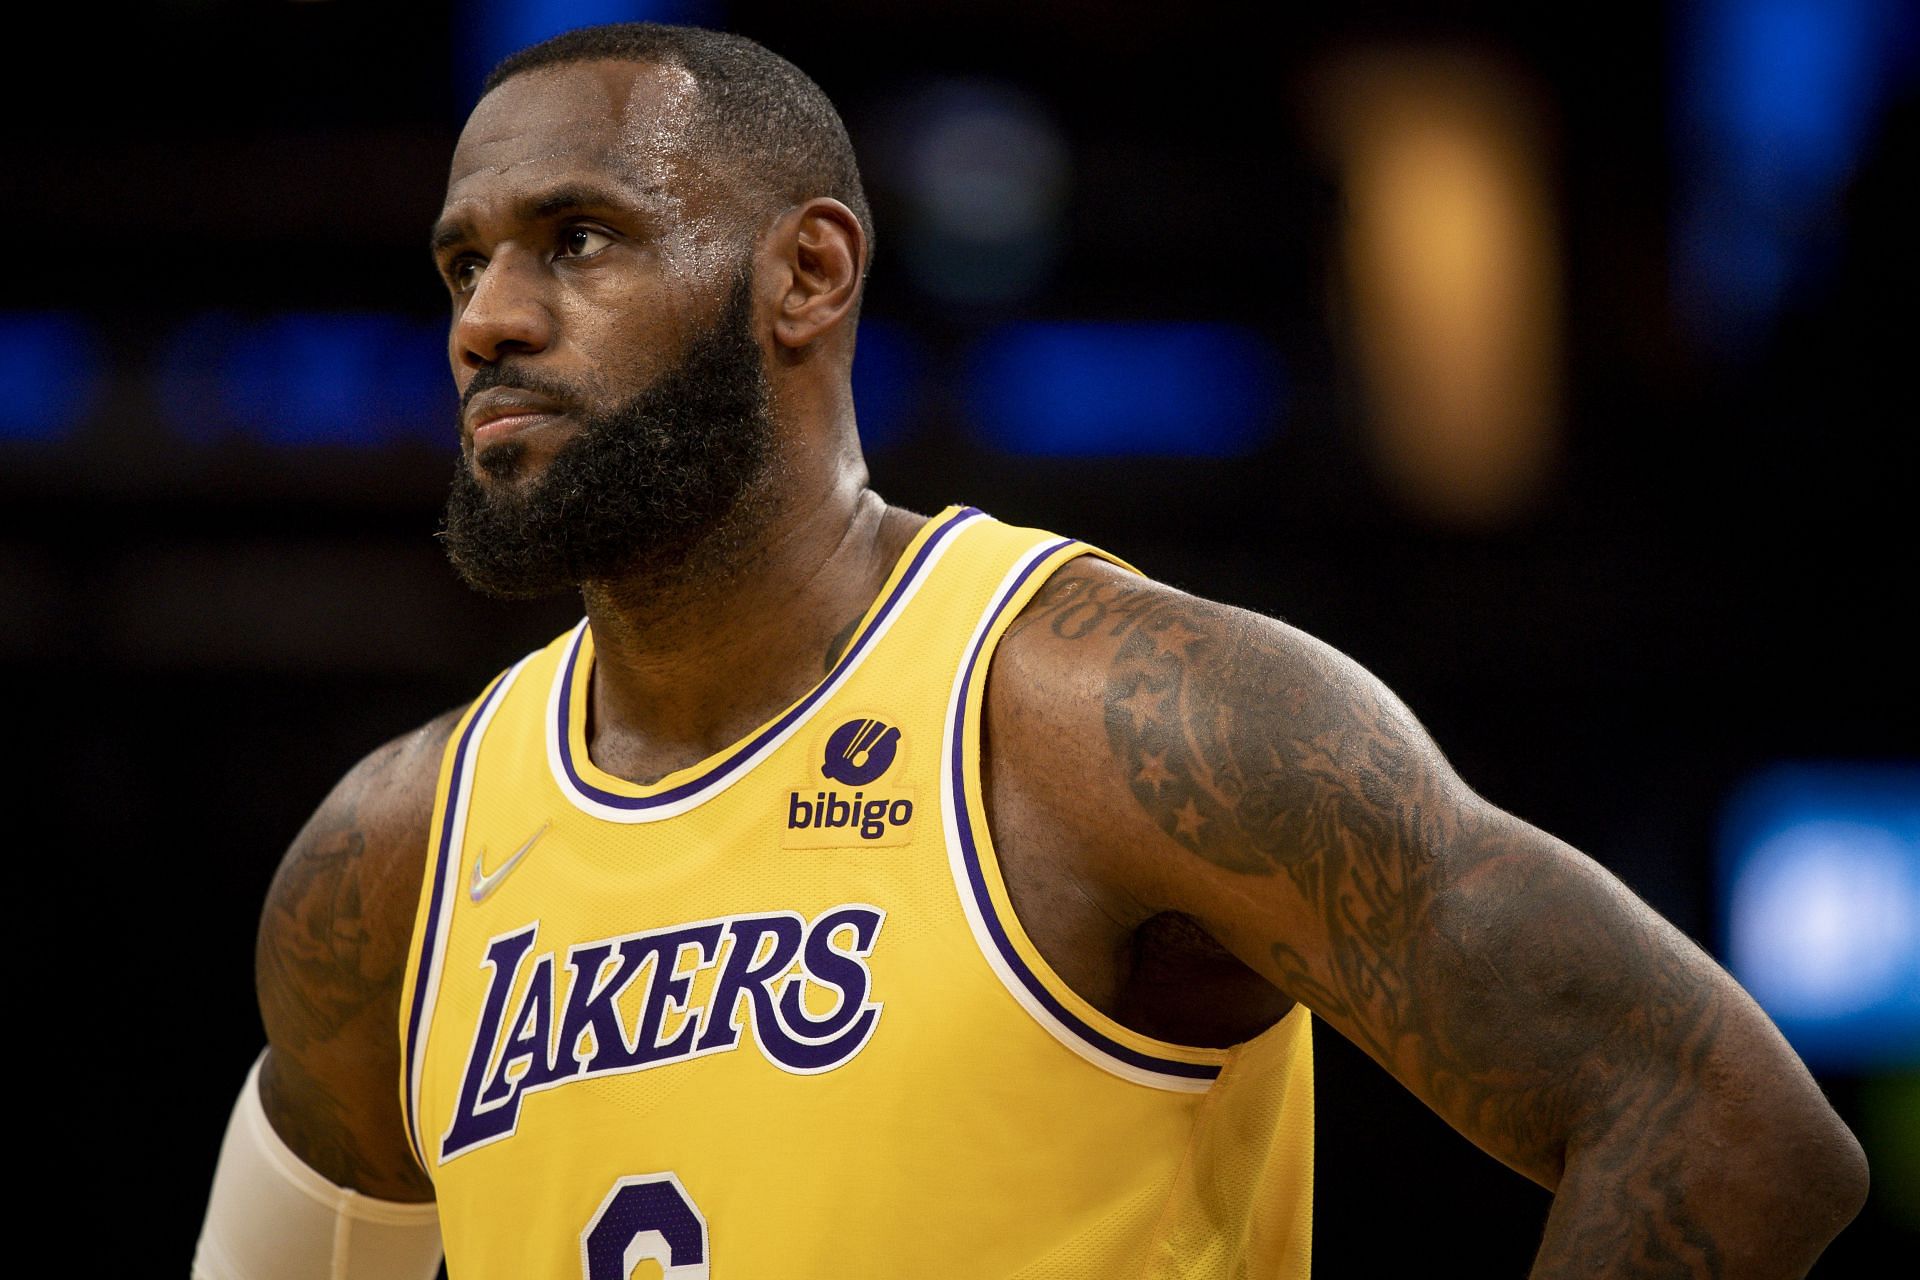 LeBron James ejected from NBA game after elbowing Isaiah Stewart's